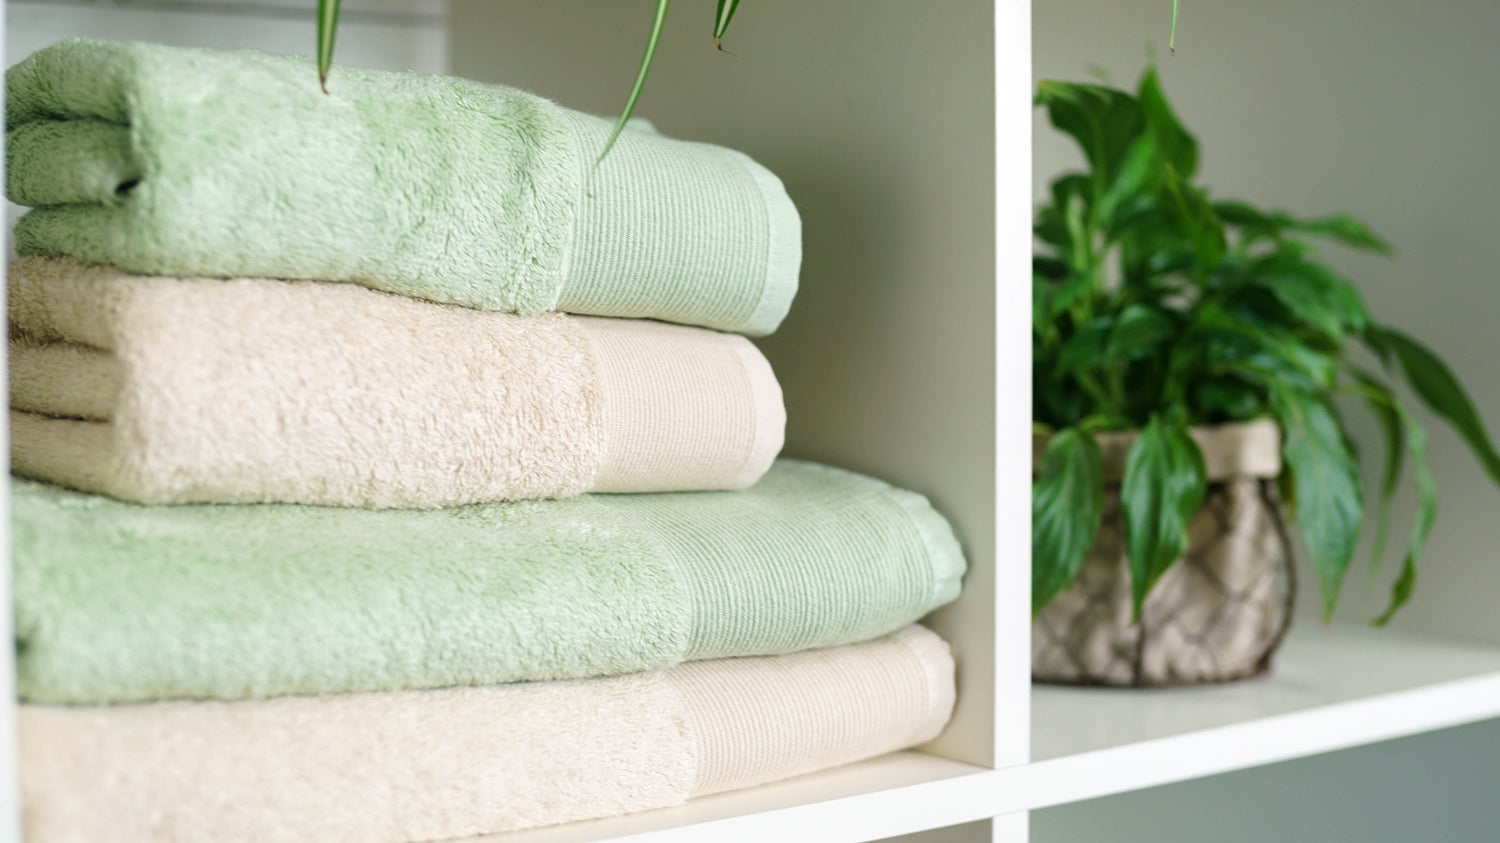 Green Bathroom Towels - Luxury Cotton Towels - Plain &amp; Patterned